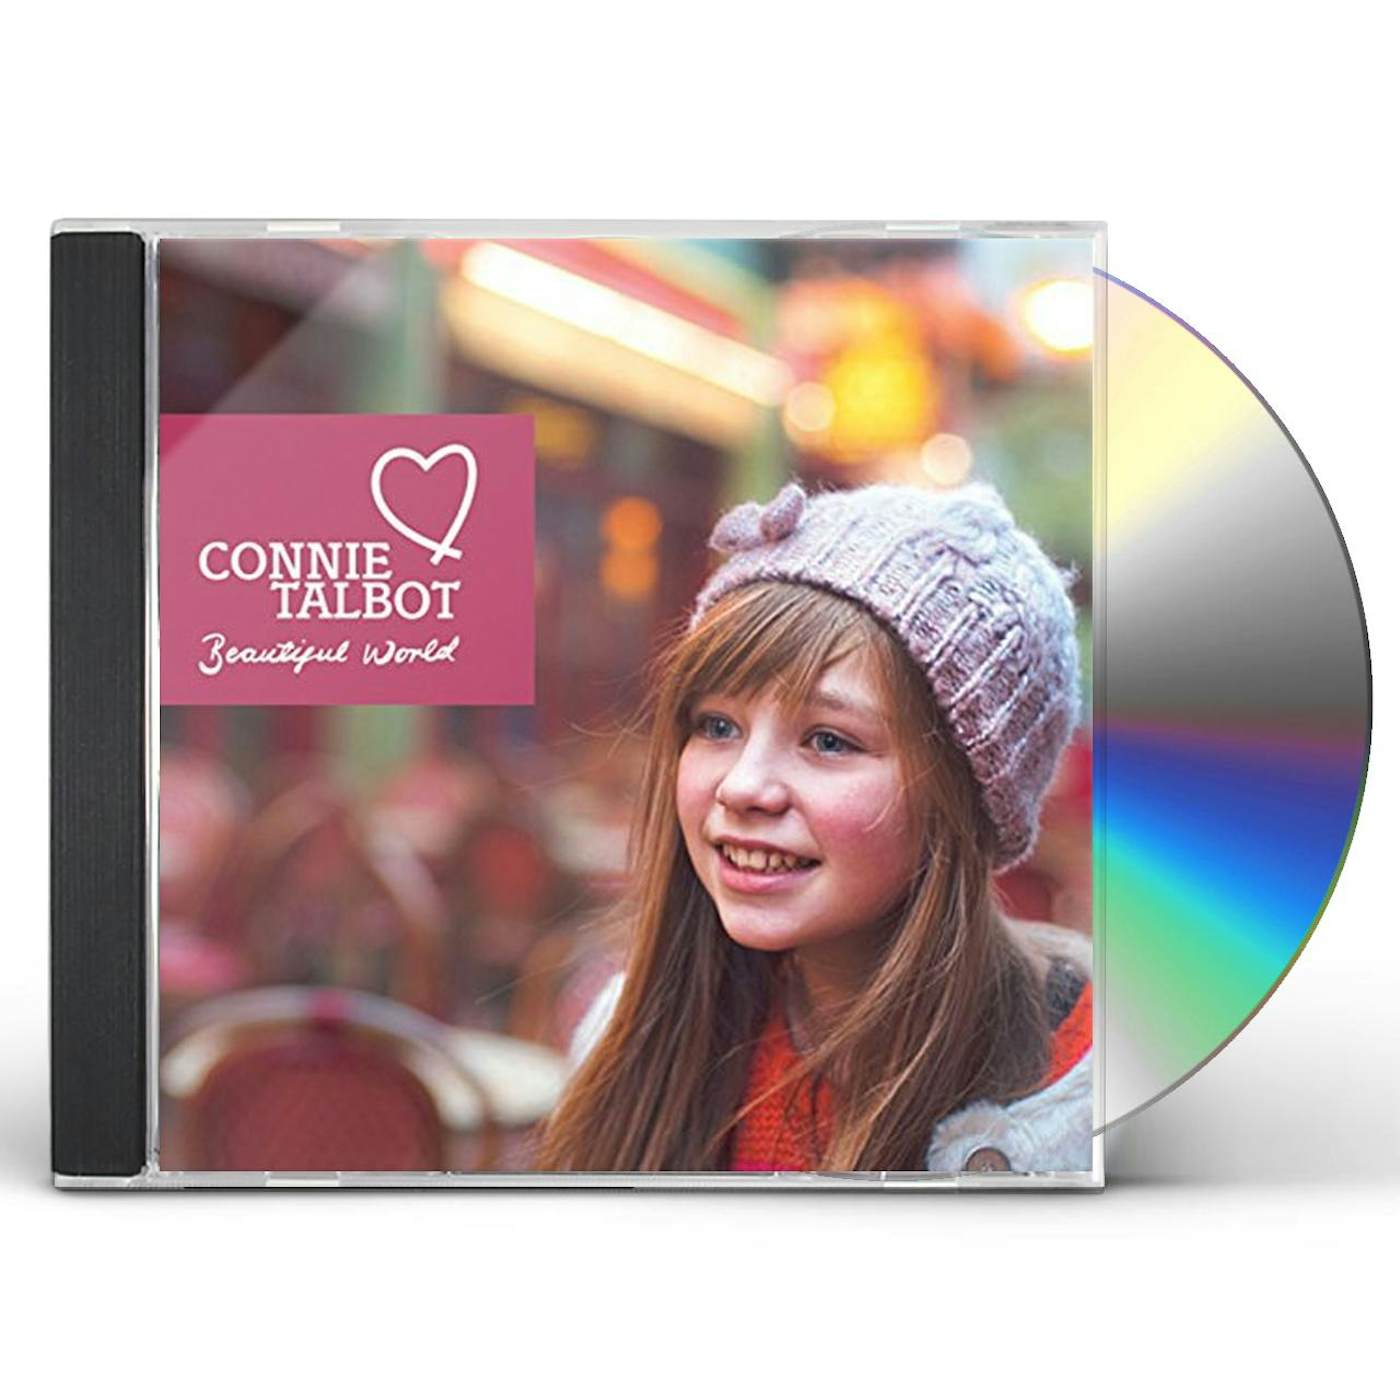 Count On Me - song and lyrics by Connie Talbot